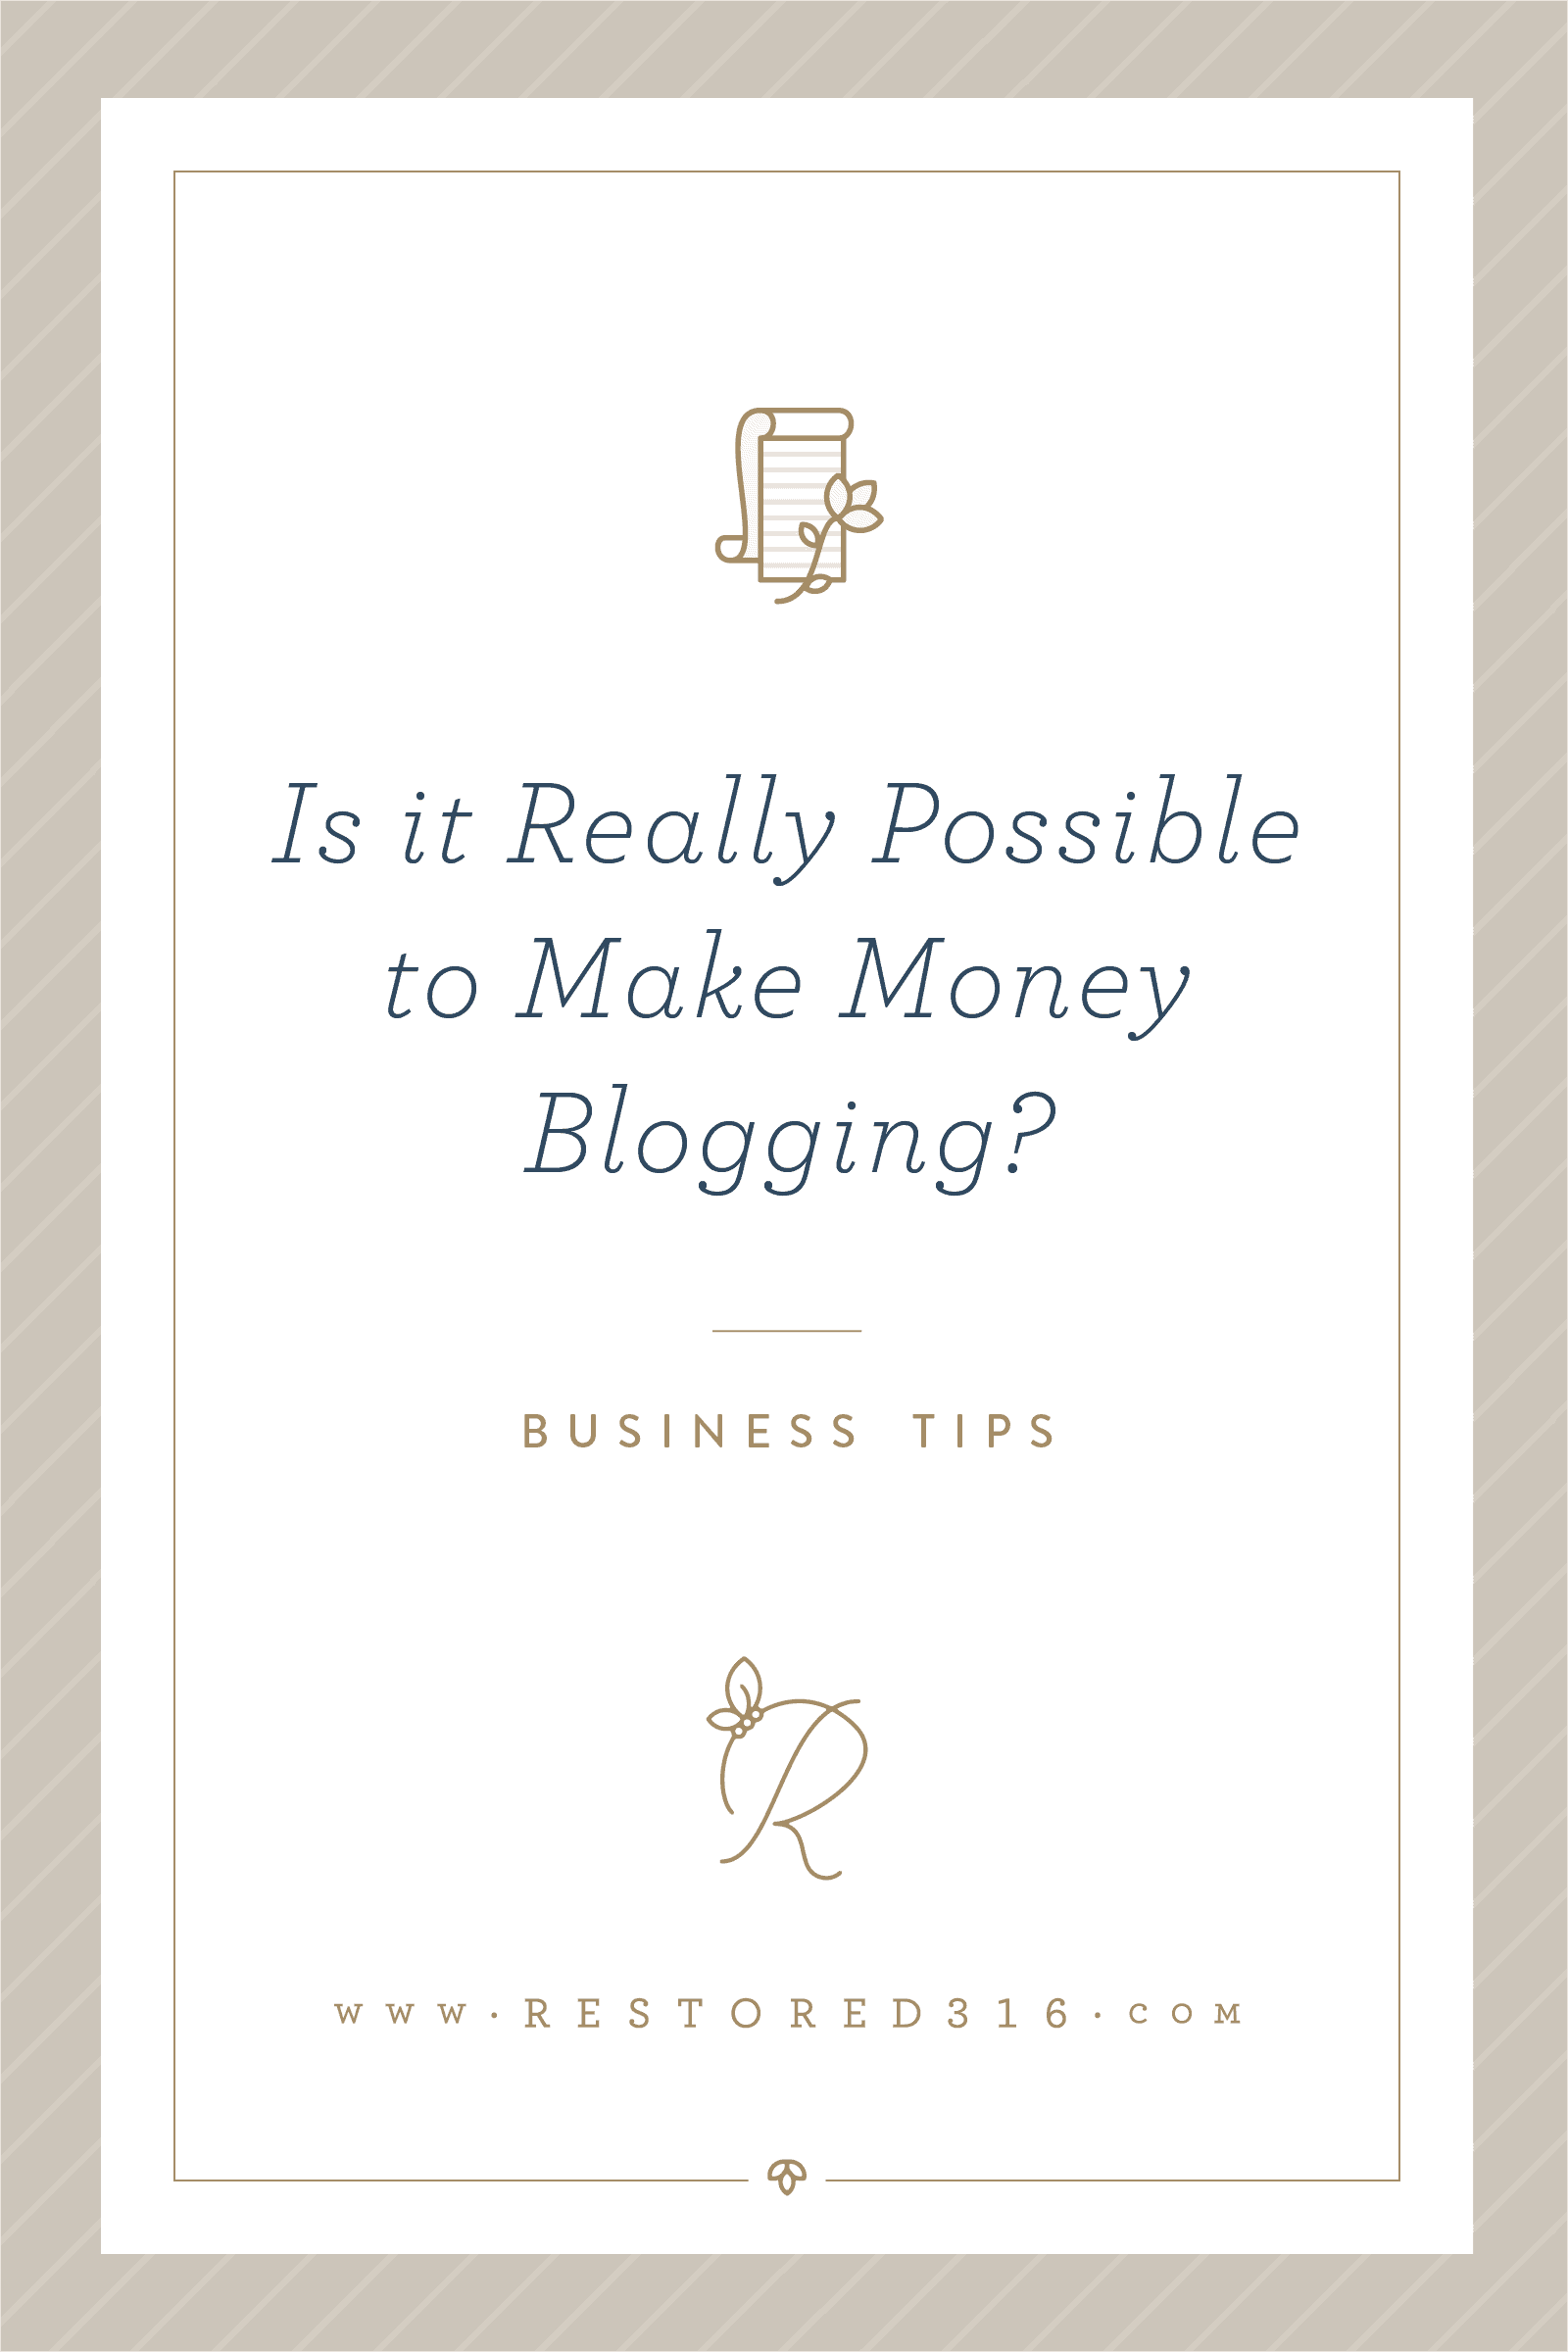 Is it really possible to make money blogging?